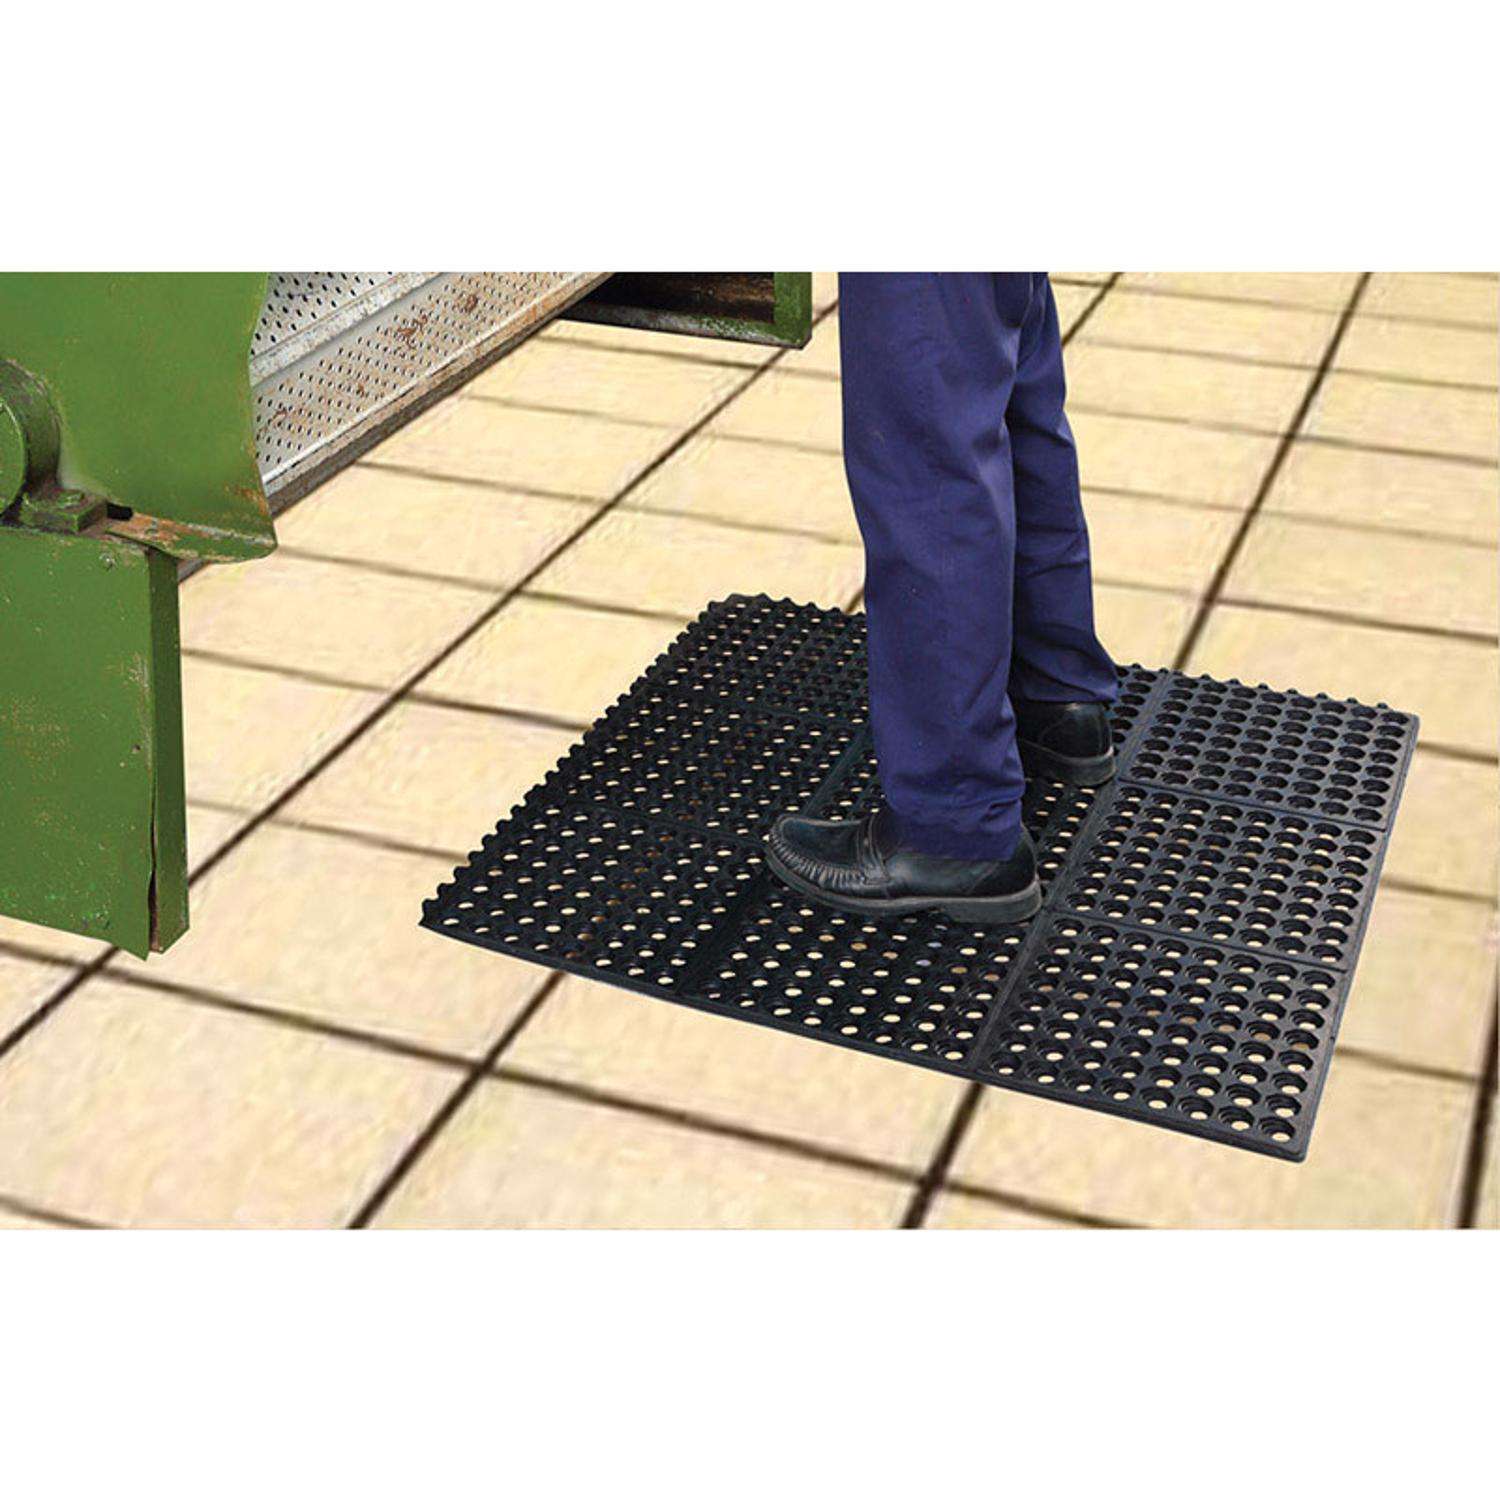 Shower Mats: Commercial Mats for Wet Areas in PA, NJ & DE